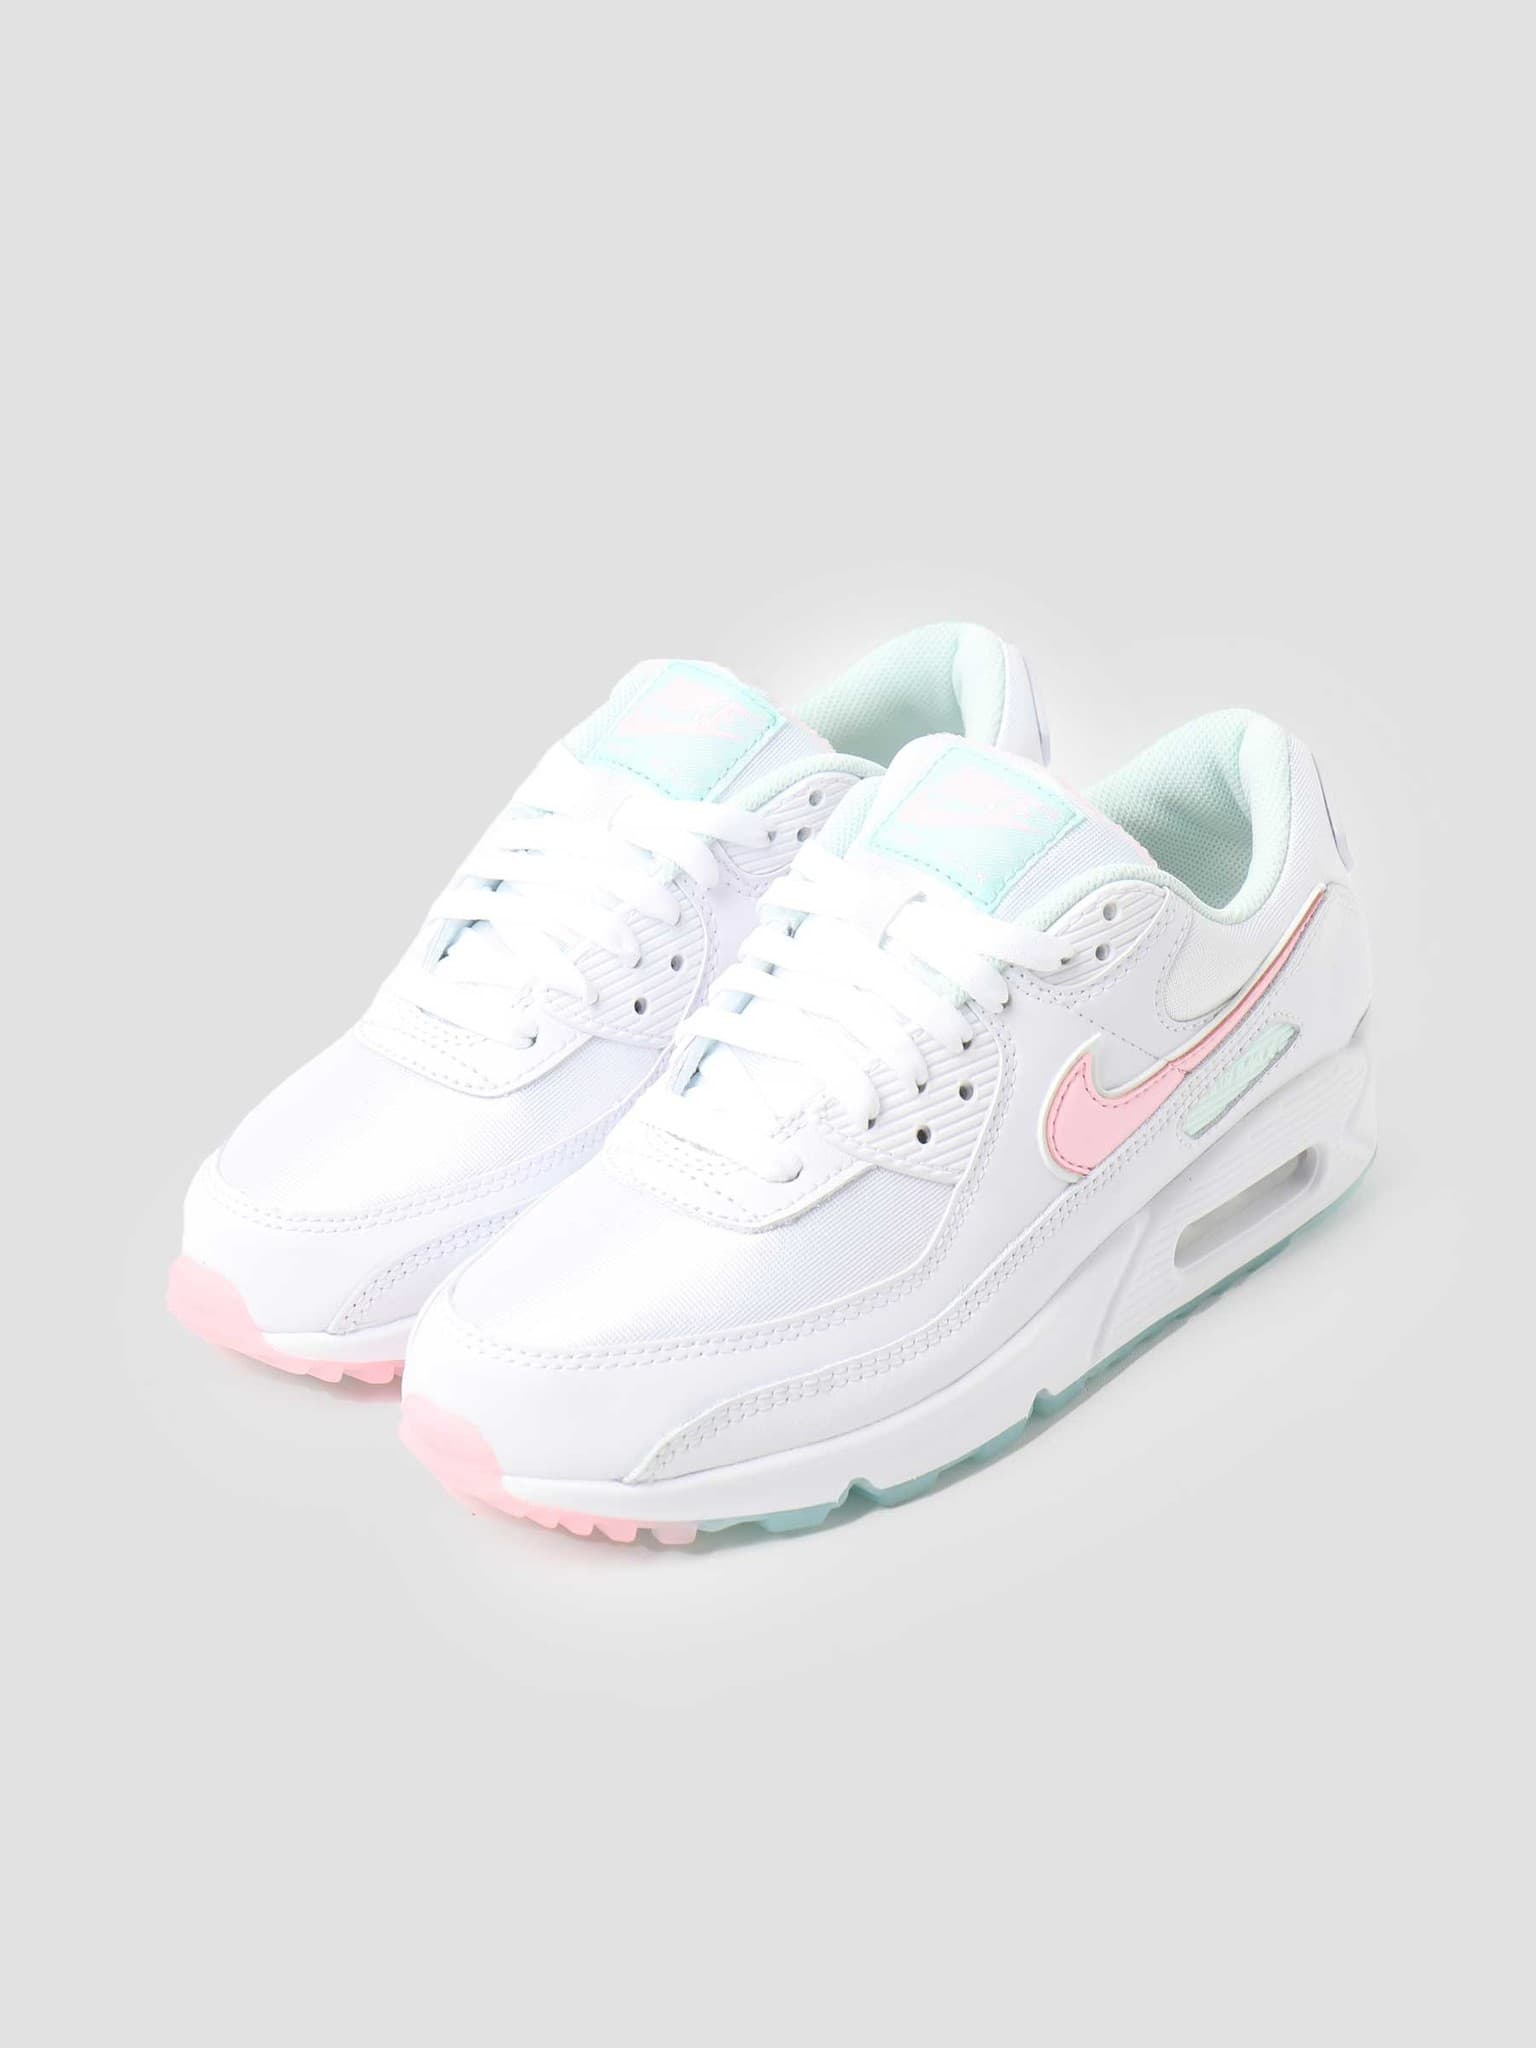 W Air Max 90 White Arctic Punch Barely Green DJ1493-100